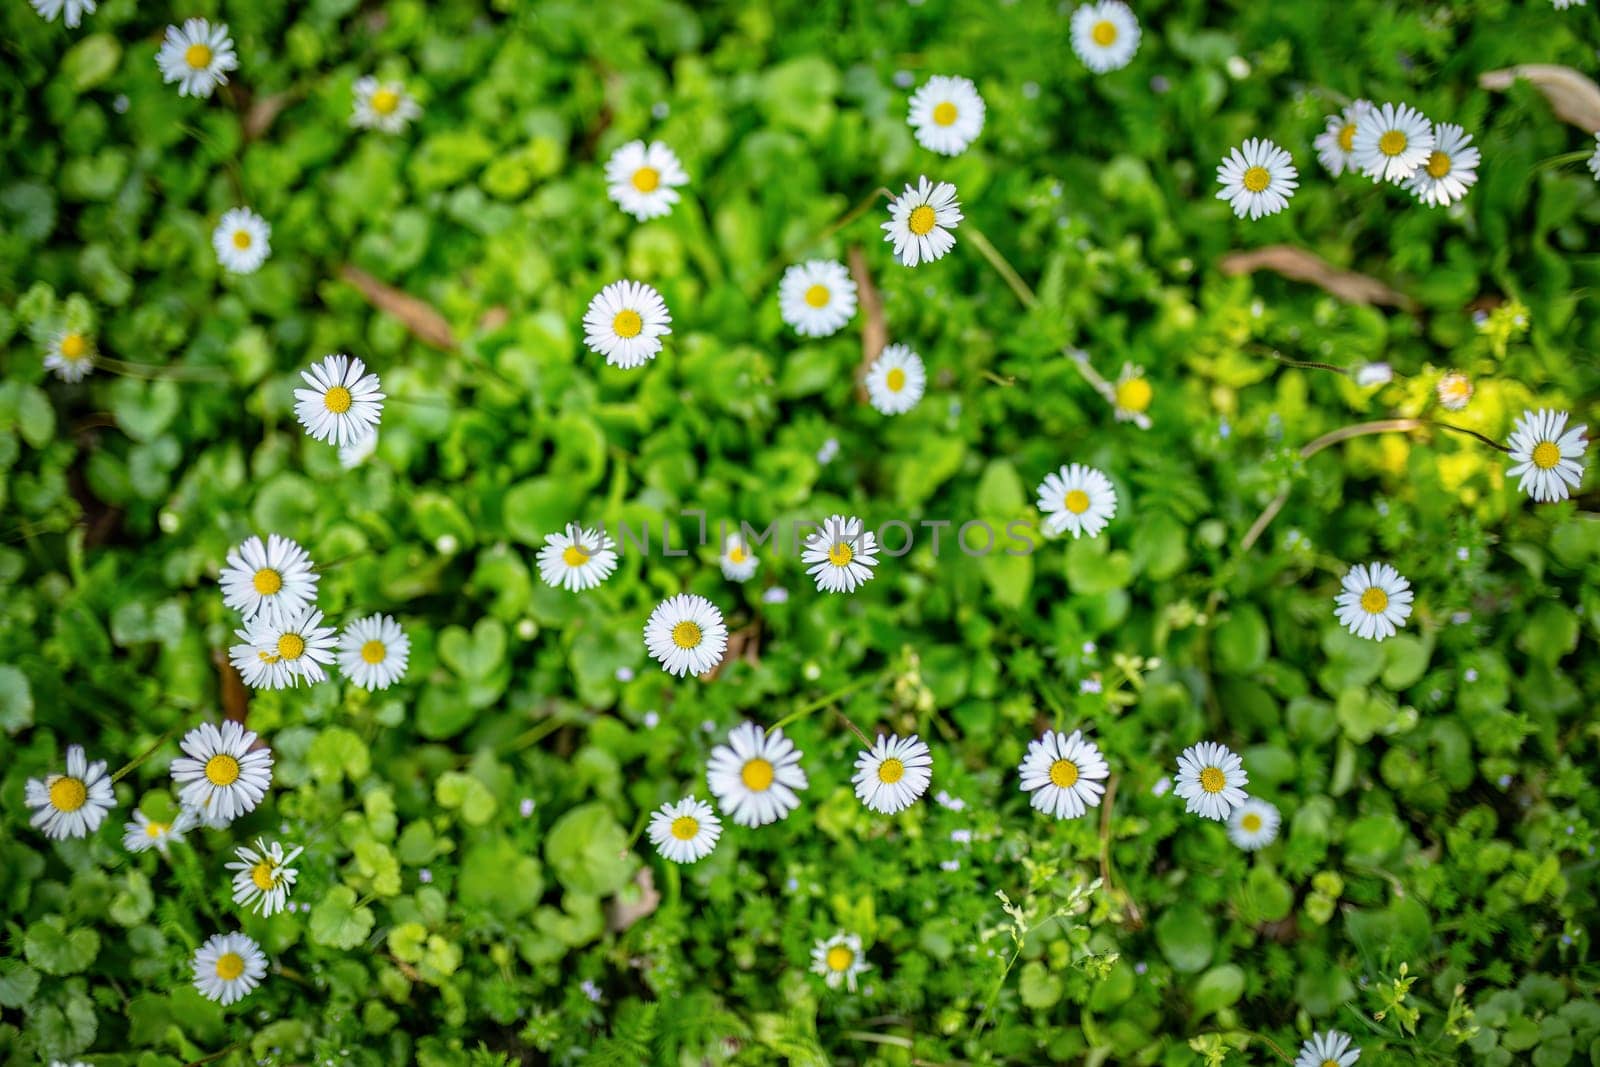 A Group of Daisies in a Field of Green Grass by pippocarlot